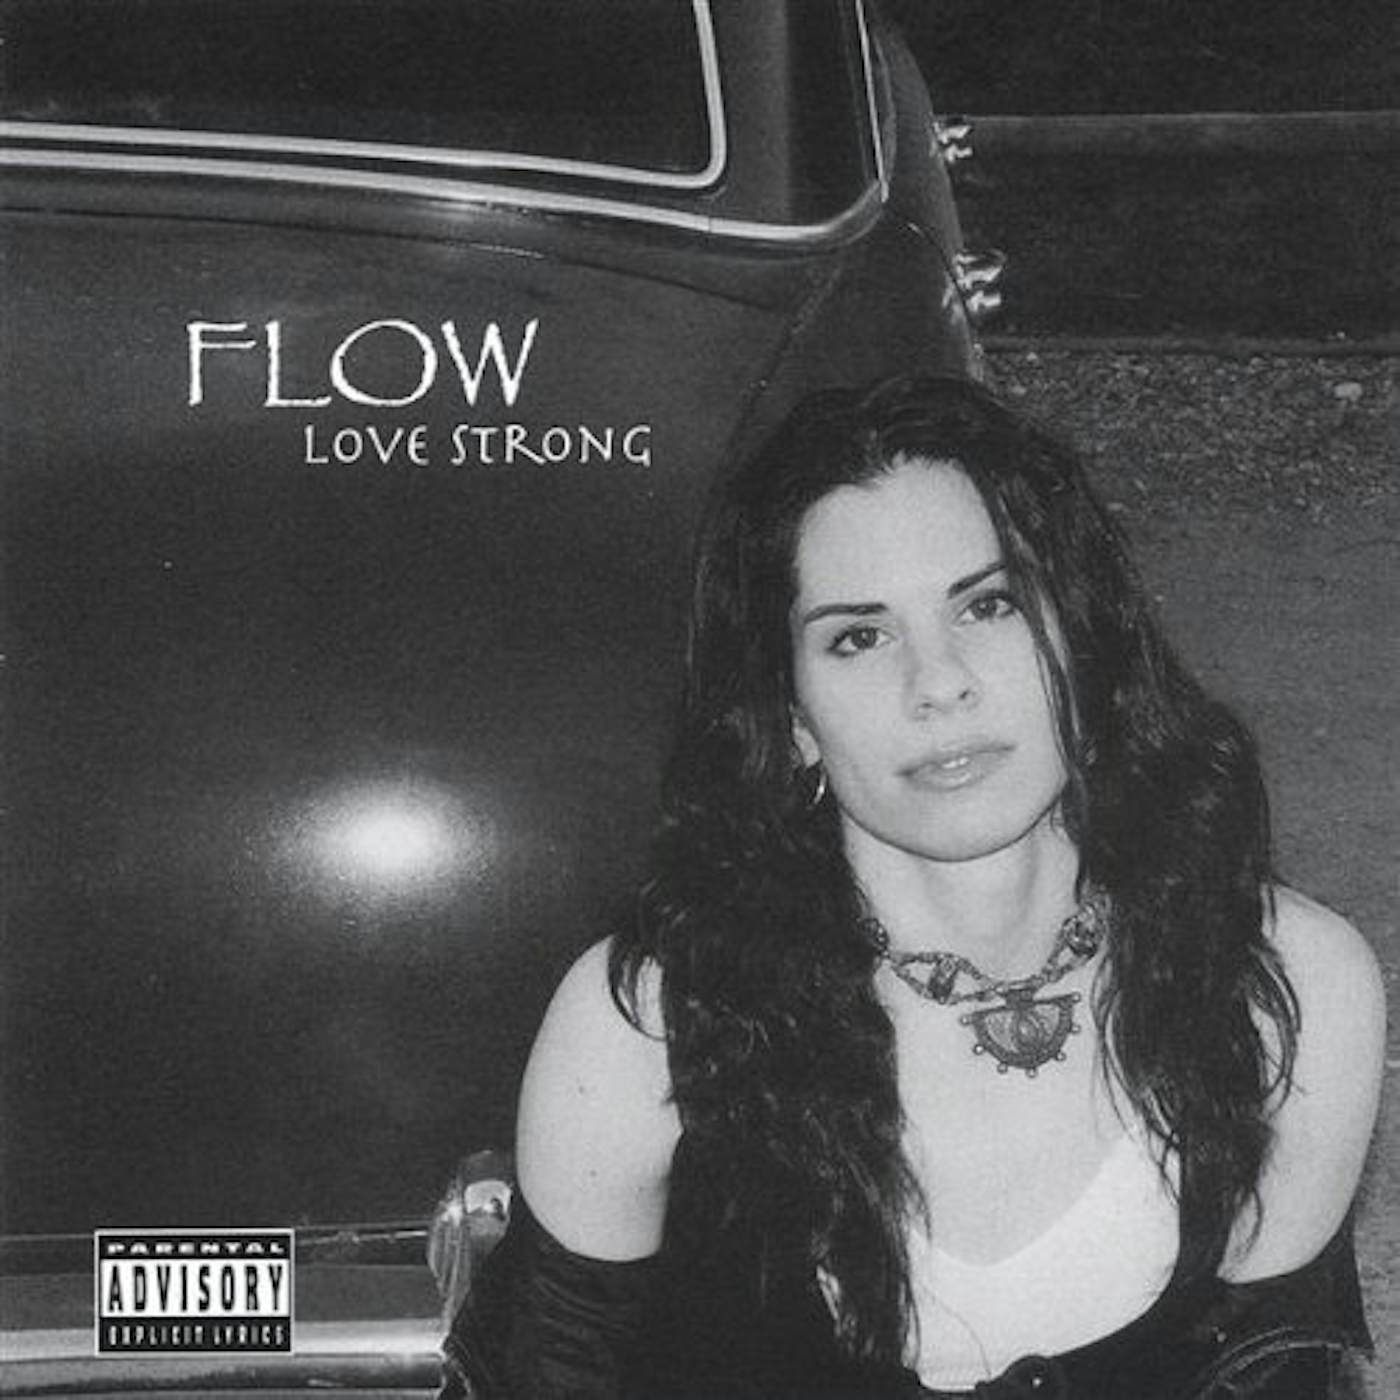 The Flow LOVE STRONG CD